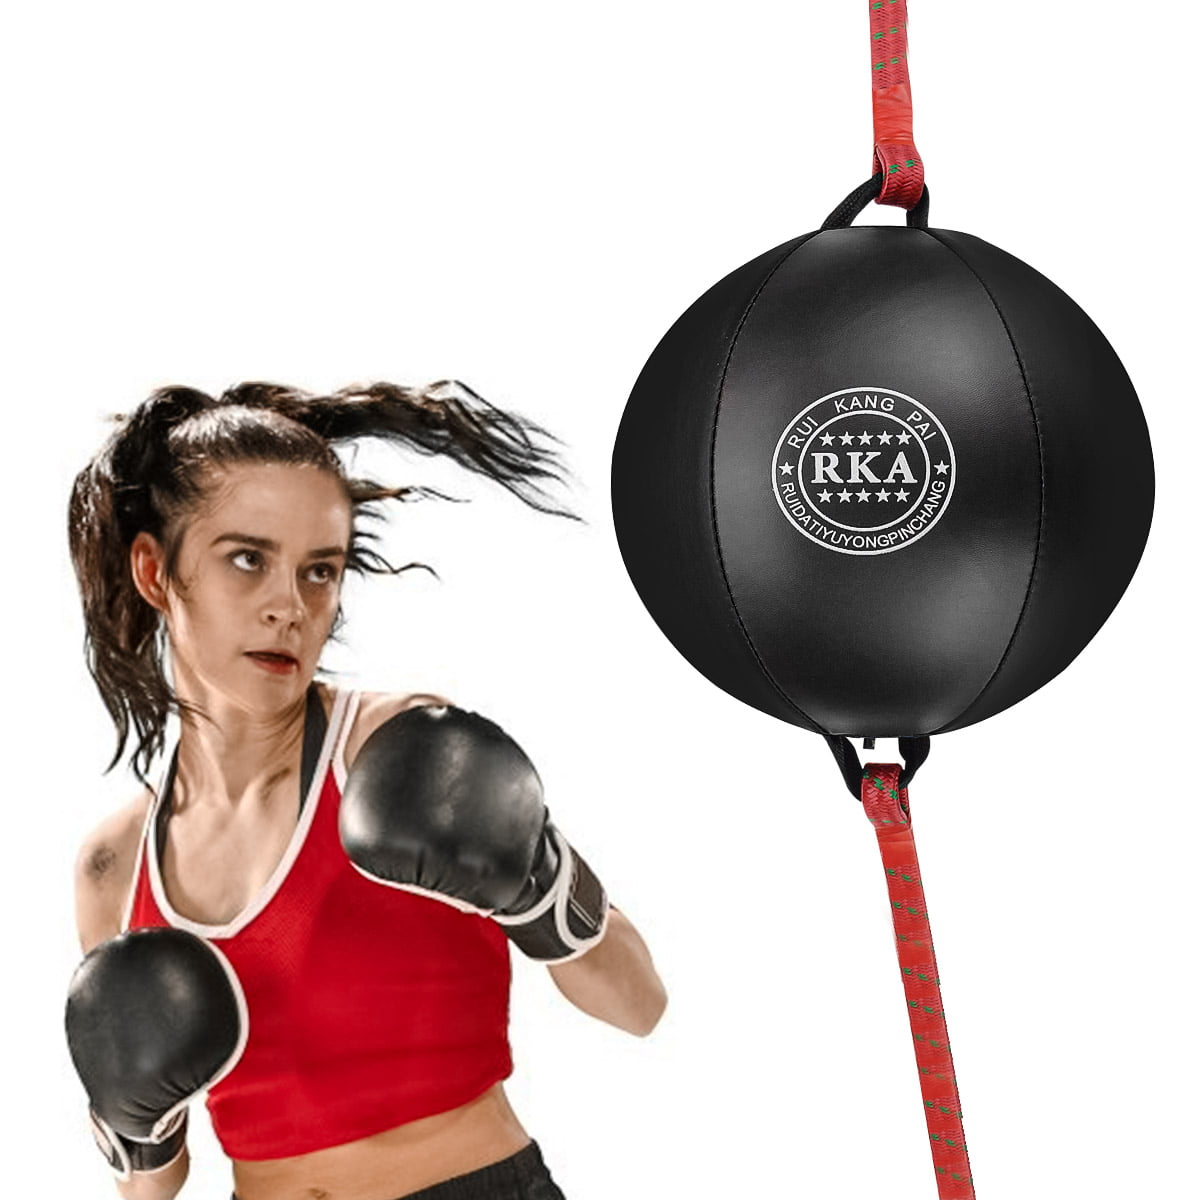 Sport Fitness MMA Boxing Punching Speed Training Ball Release Pear Bag Exercise 